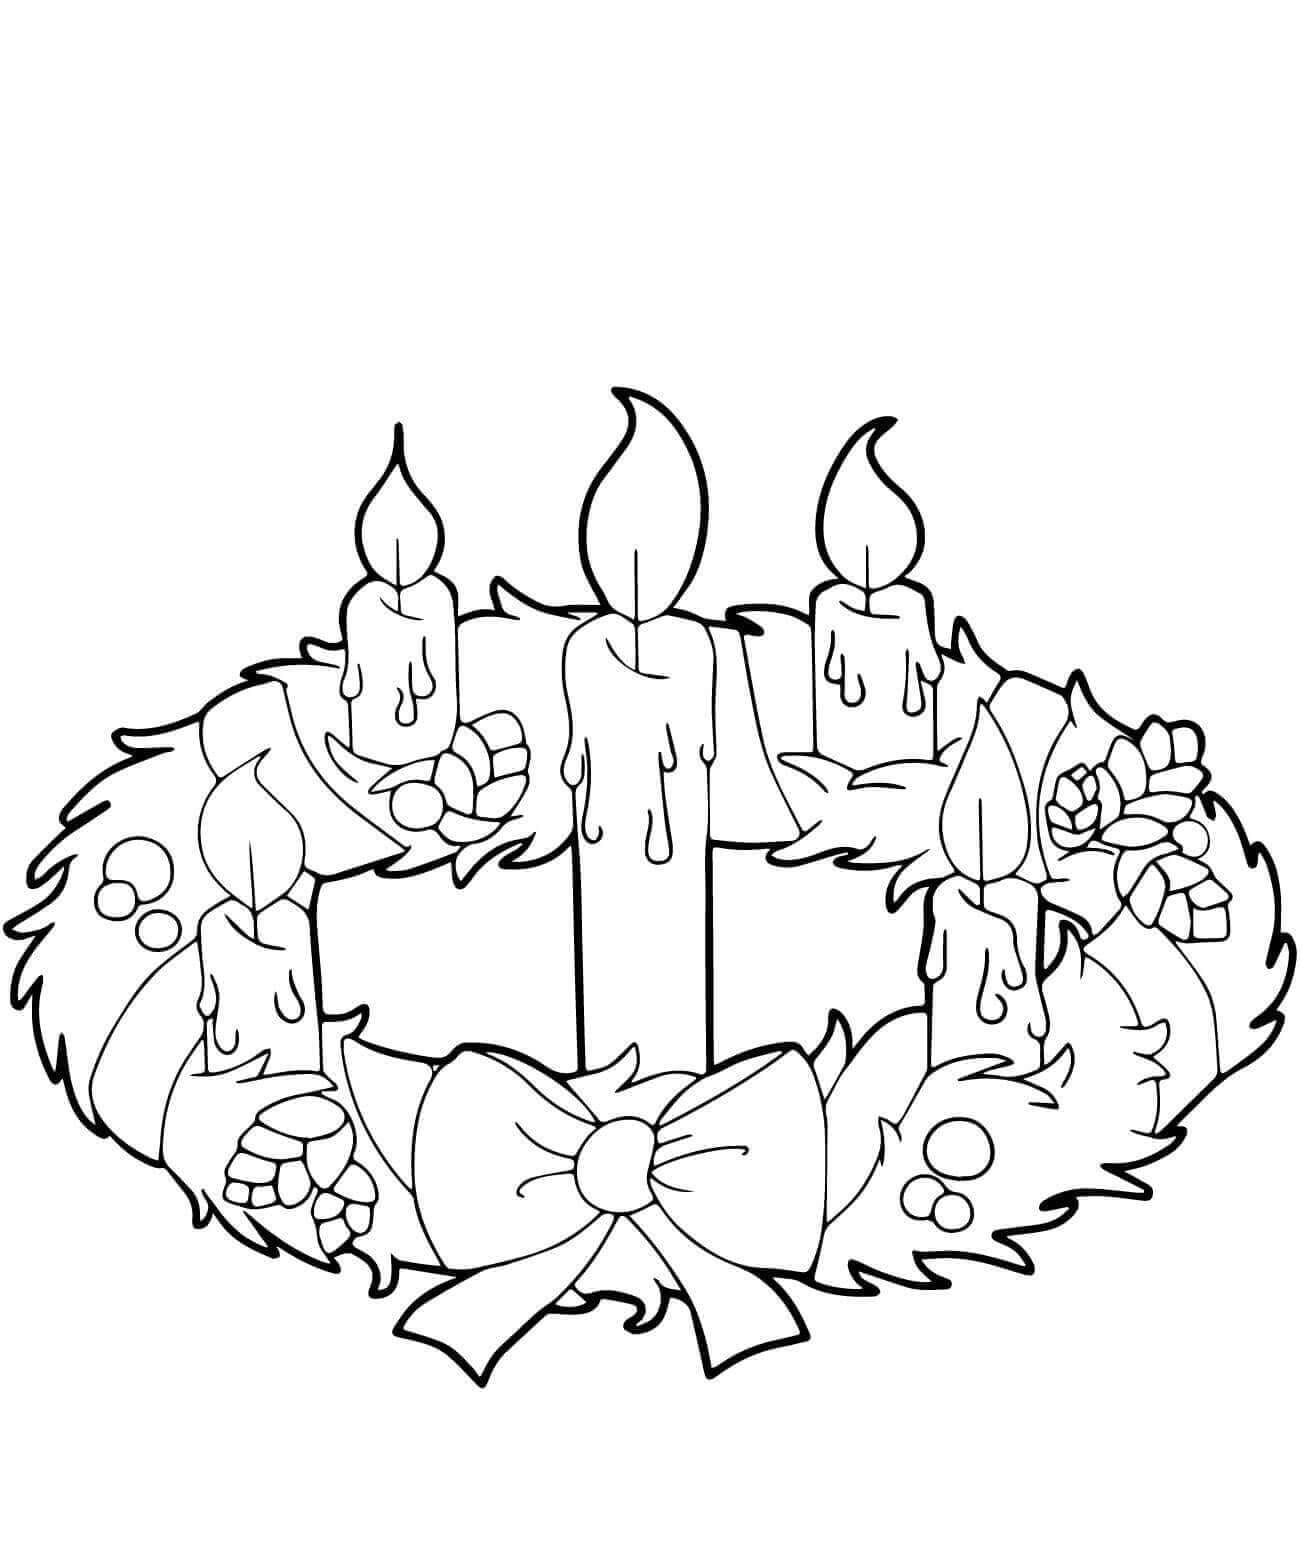 Printable Advent Wreath Coloring Pages - Printable World Holiday